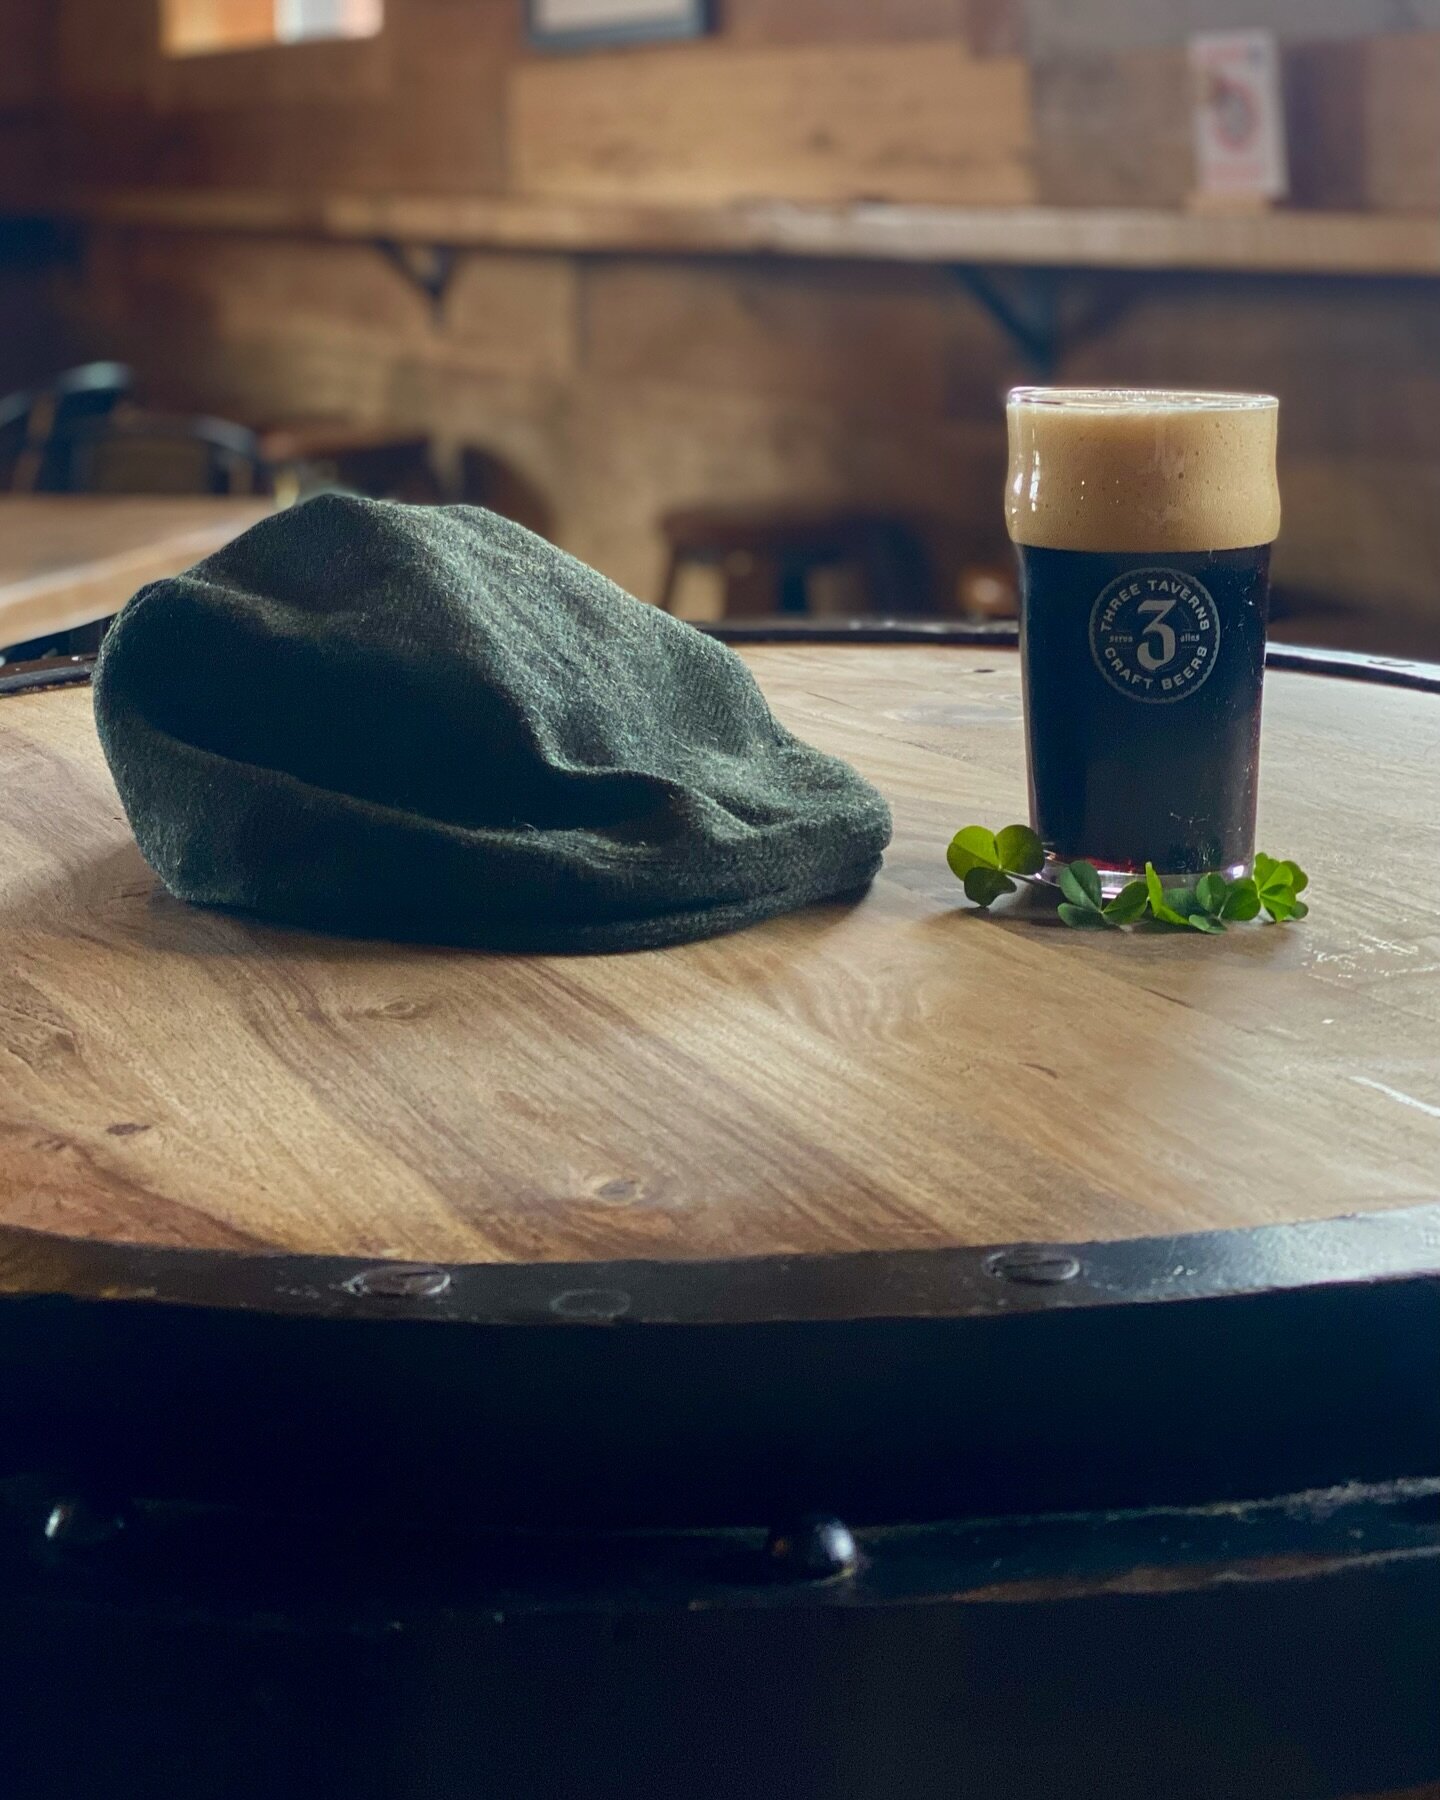 It&rsquo;s a glorious day for a pint of Maury Mable&rsquo;s Dry Irish Stout to kick off your St. Patrick&rsquo;s day celebrations. Pouring at select Decatur locations and at both our taprooms. Cheers all and happy St. Patrick&rsquo;s Day! 💚